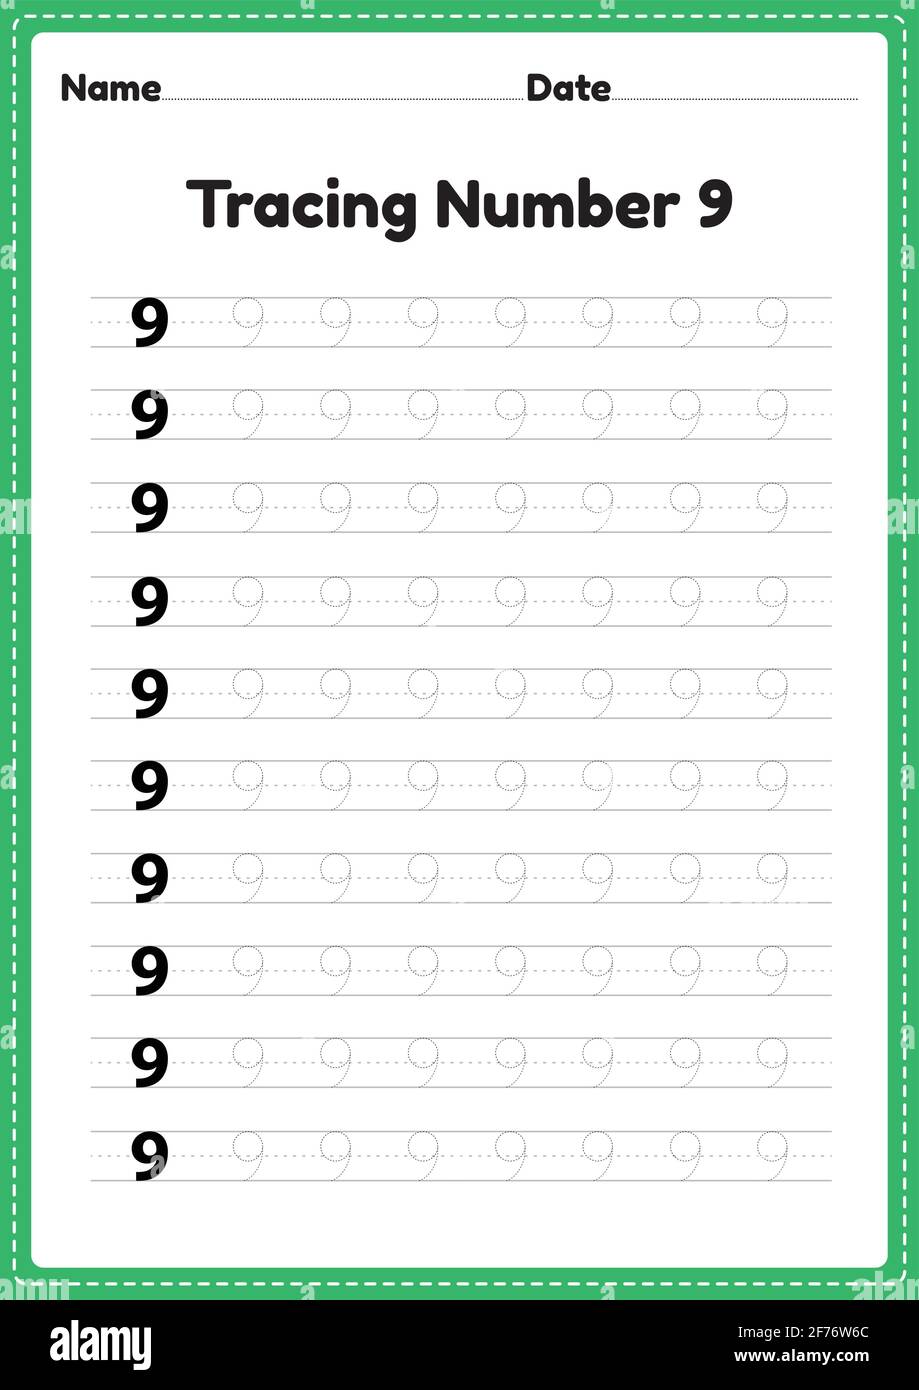 Tracing number 9 worksheet for kindergarten and preschool kids for educational handwriting practice in a printable page. Stock Vector